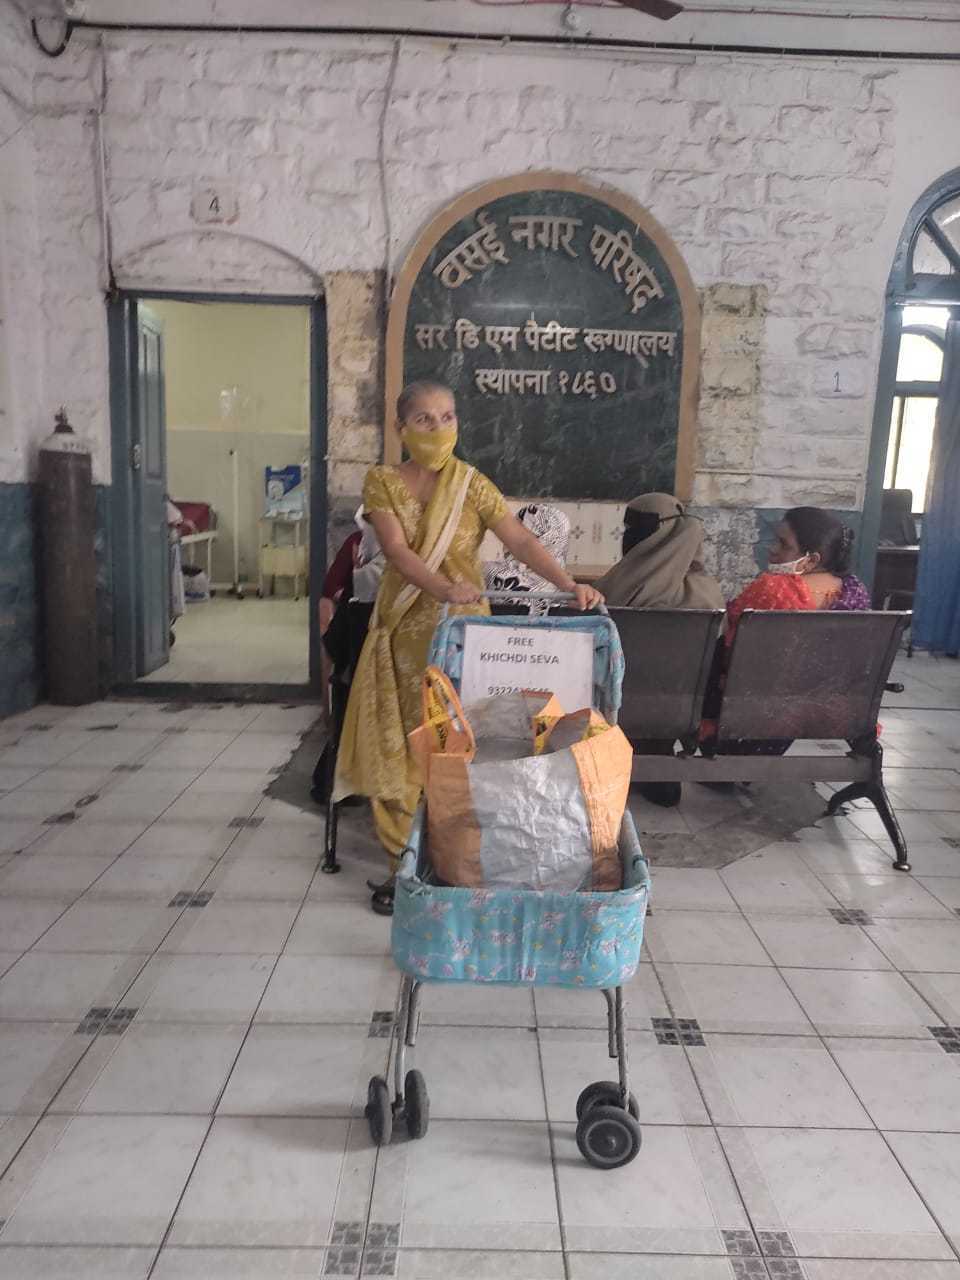 Kiran enters the hospital with her trolley every noon and begins serving khichdi to the patients